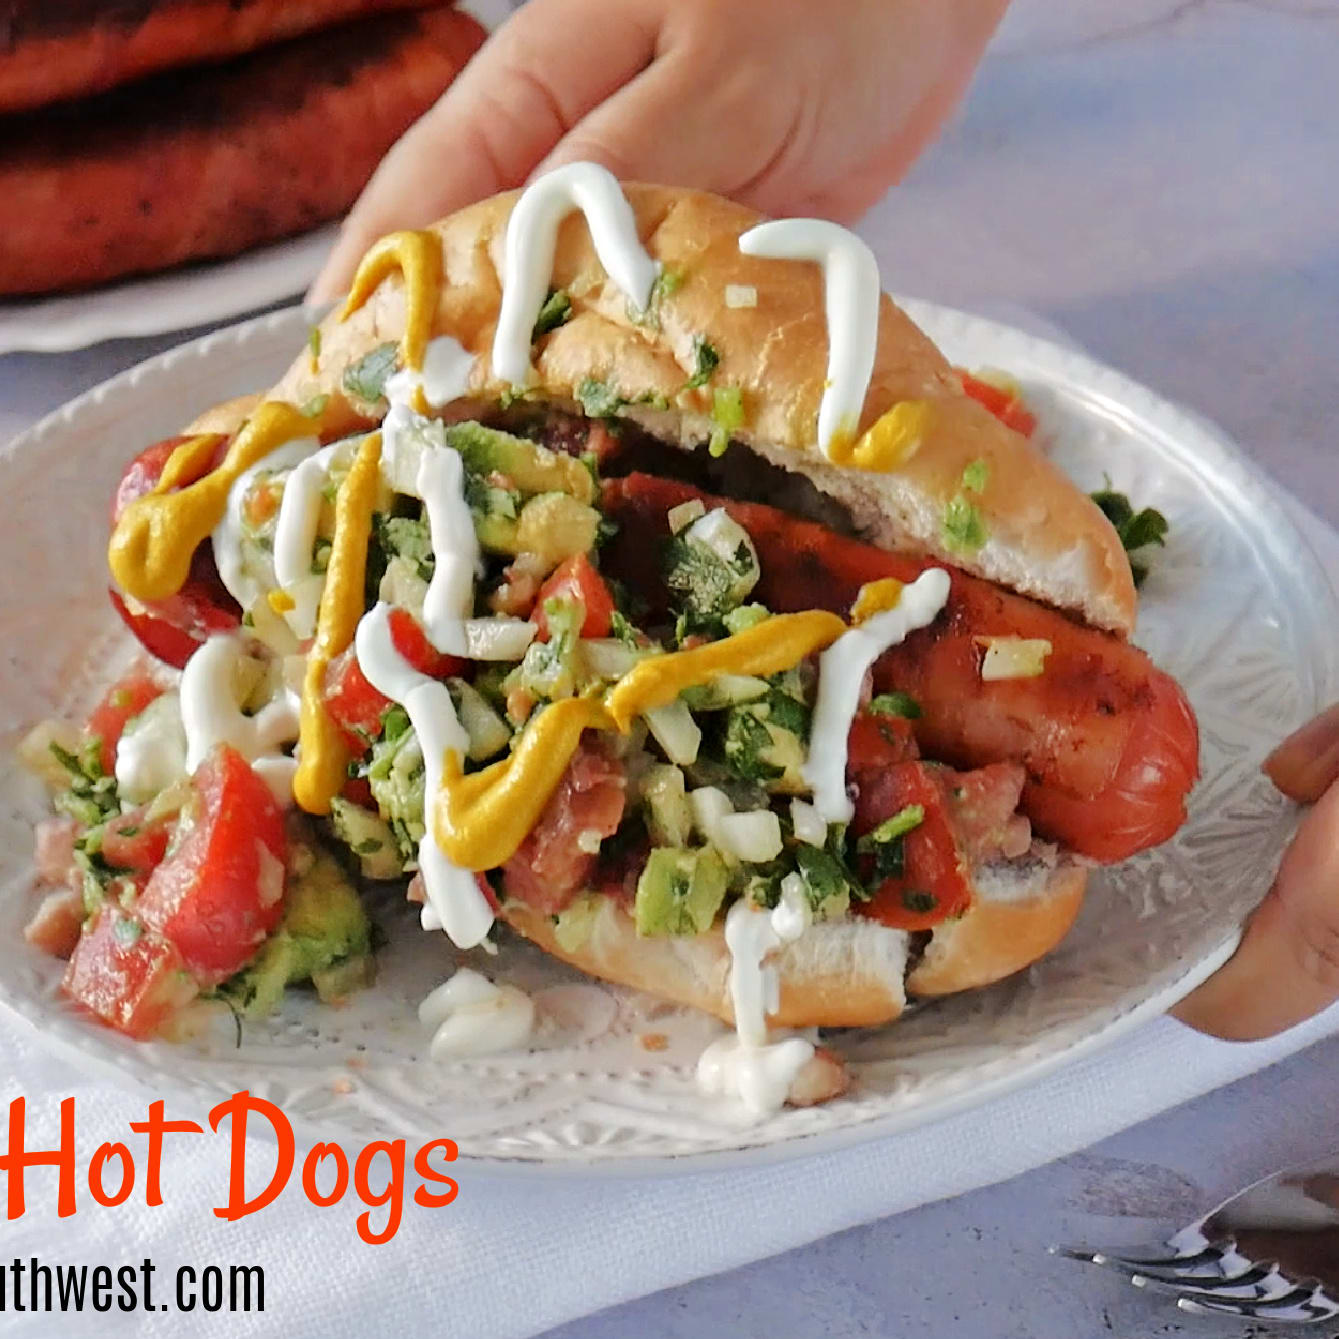 Can You Get a Legit Sonoran Hot Dog in the State of Colorado?